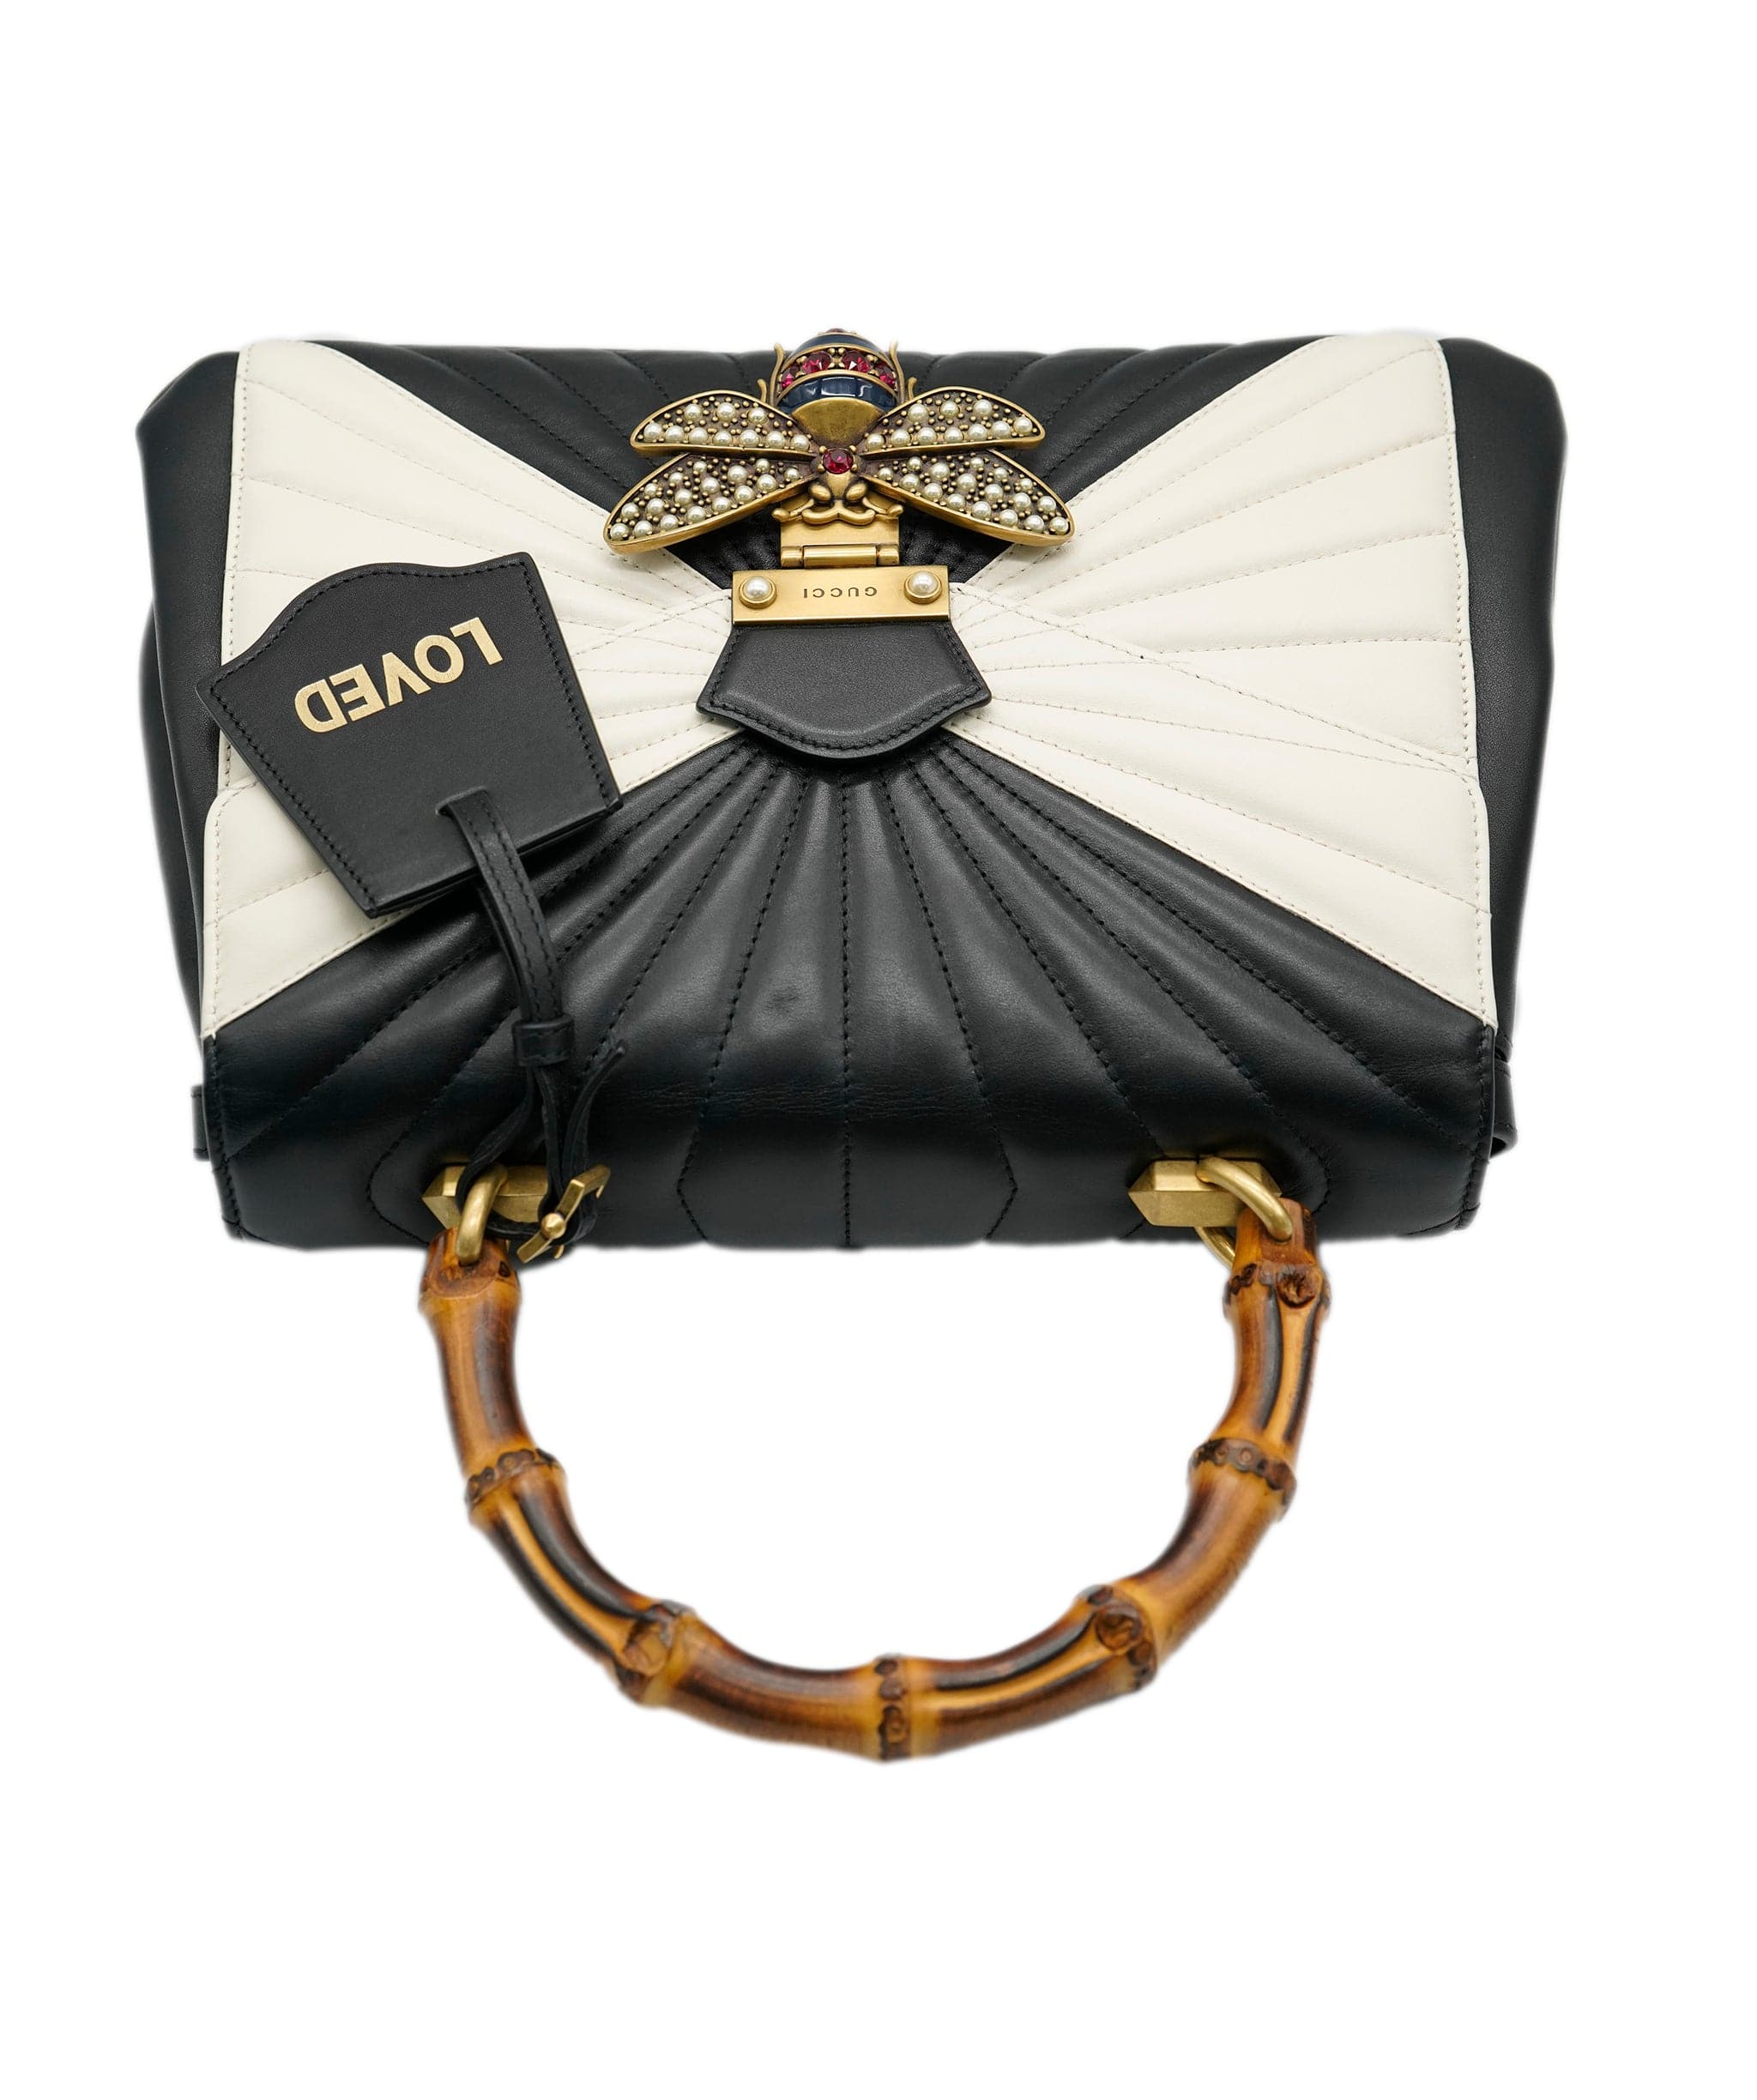 Gucci Gucci Black White Queen Margaret Bamboo Top Handle Bag ASC2064